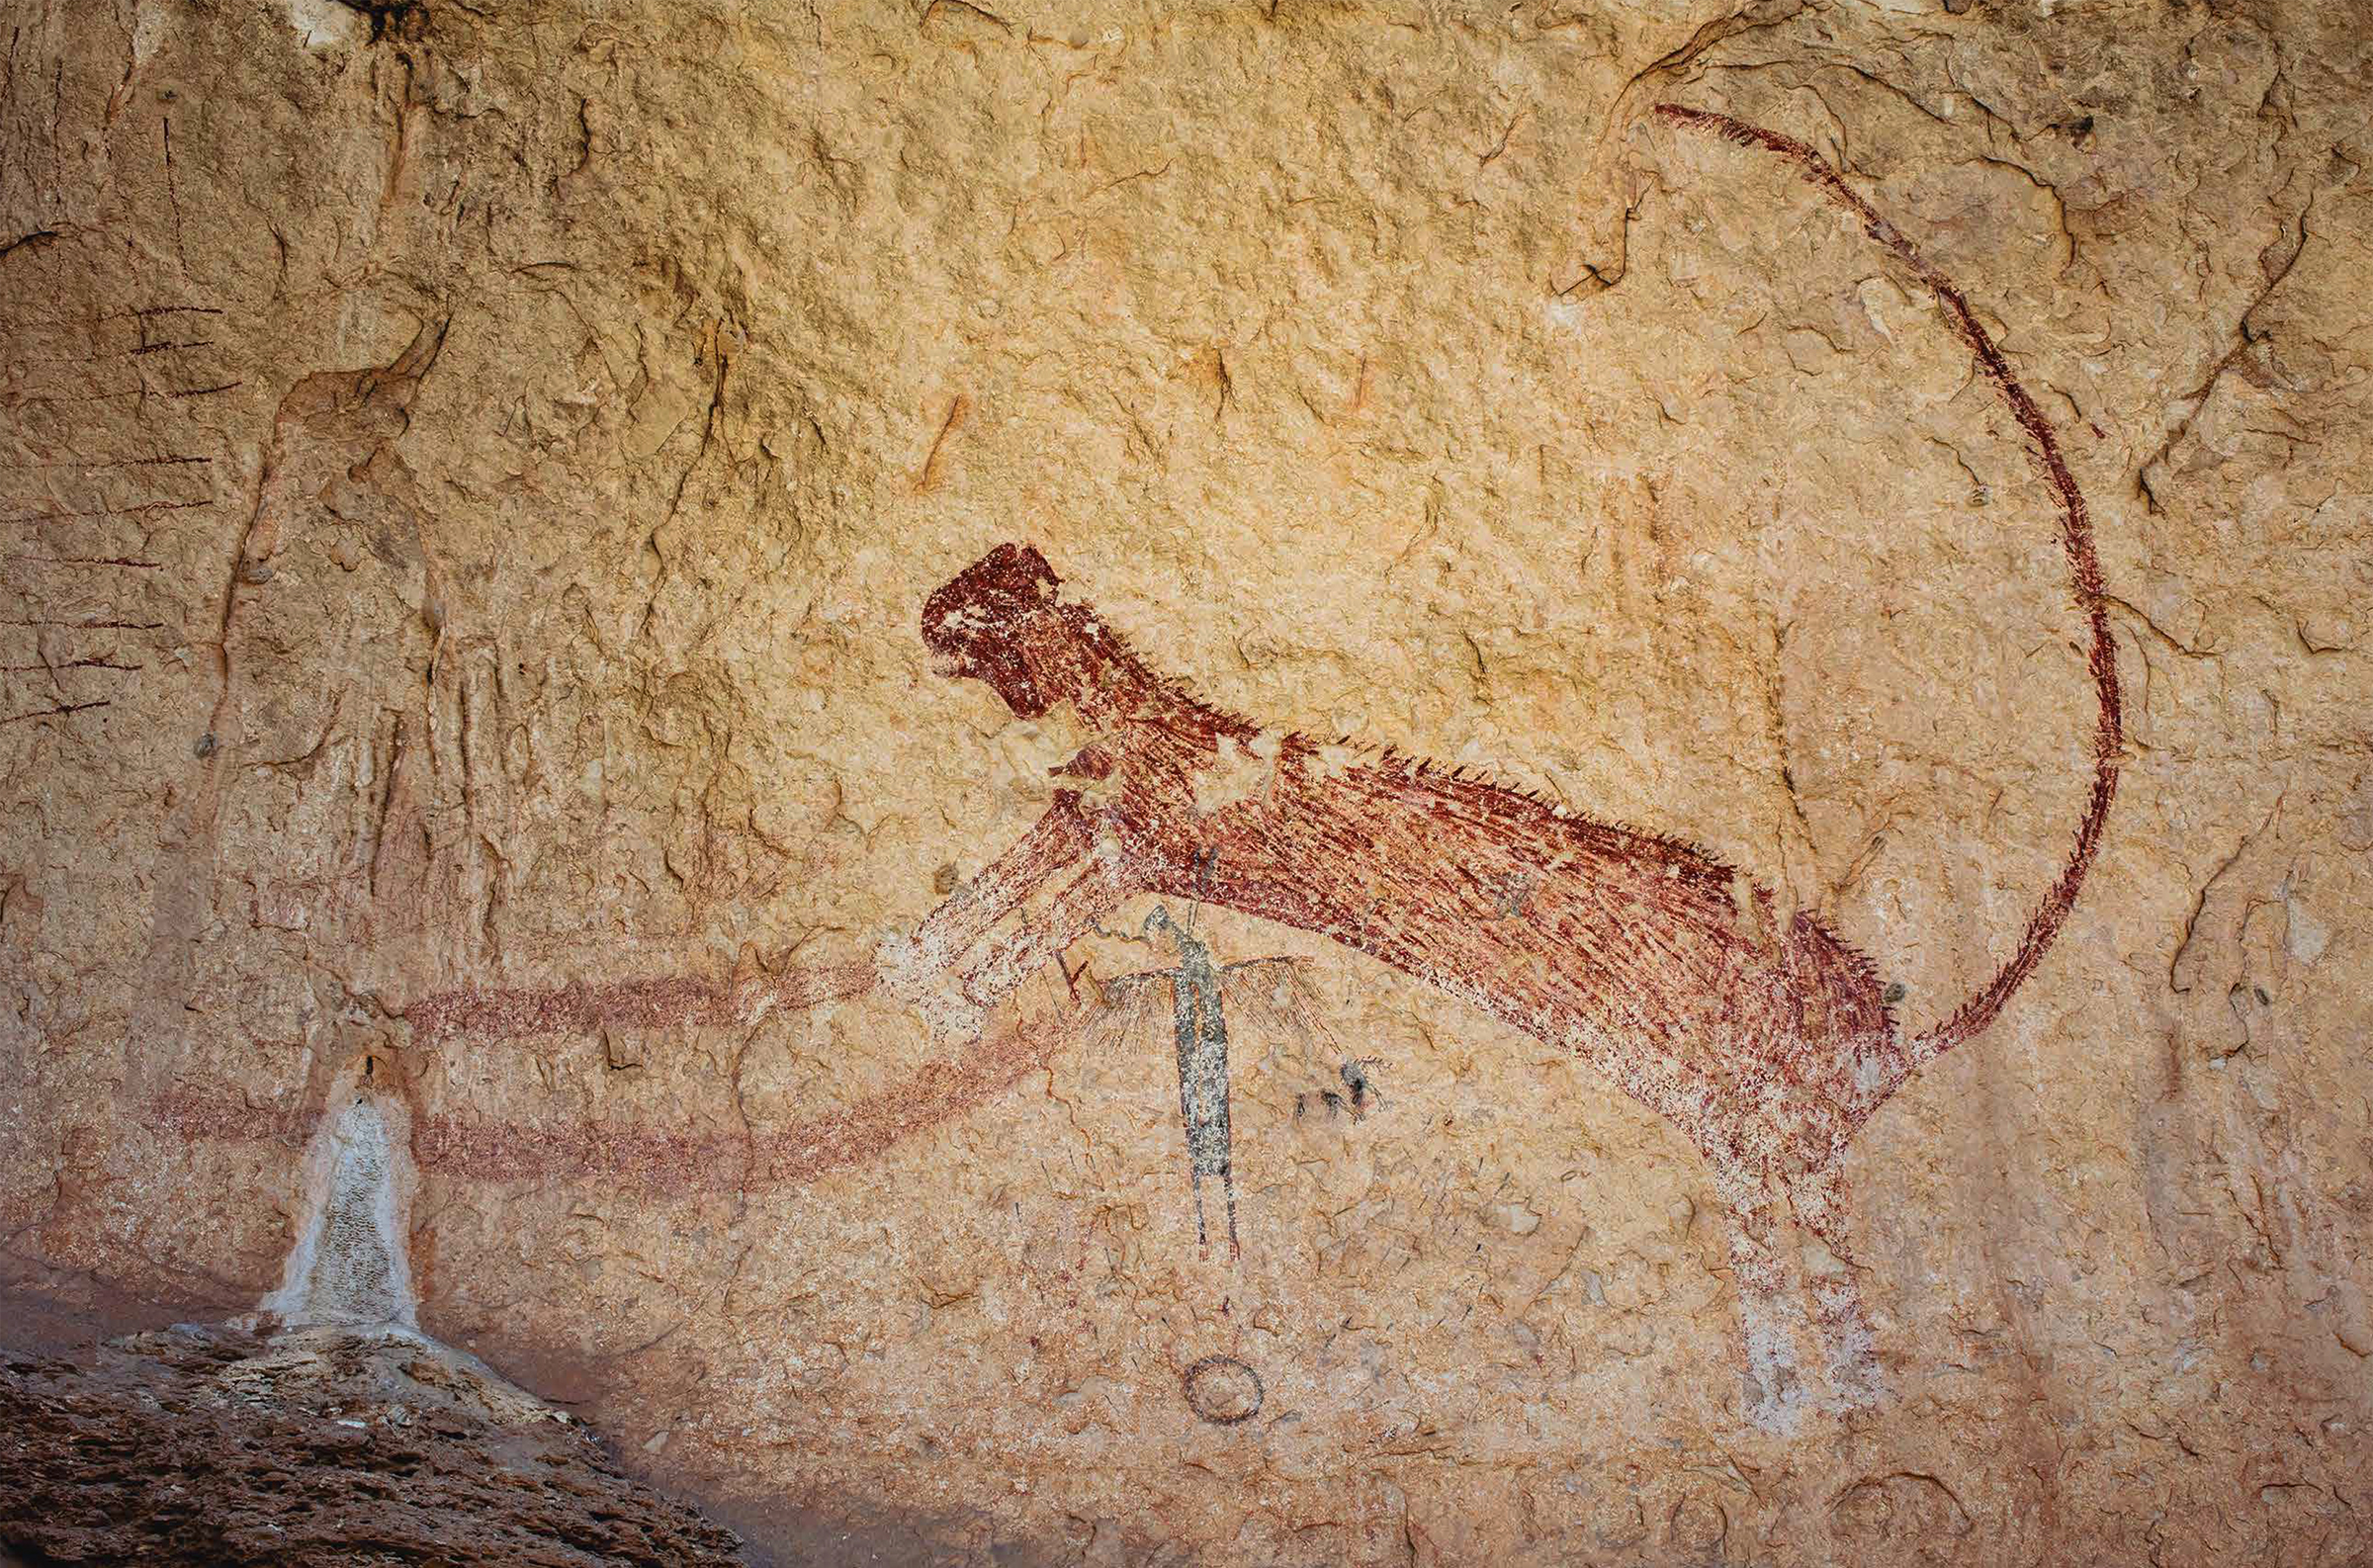 Panther Cave was named for this beautiful, 2.5-meter-long feline. Whereas the deer is associated with the sun at dawn, the feline is associated with the sun at night